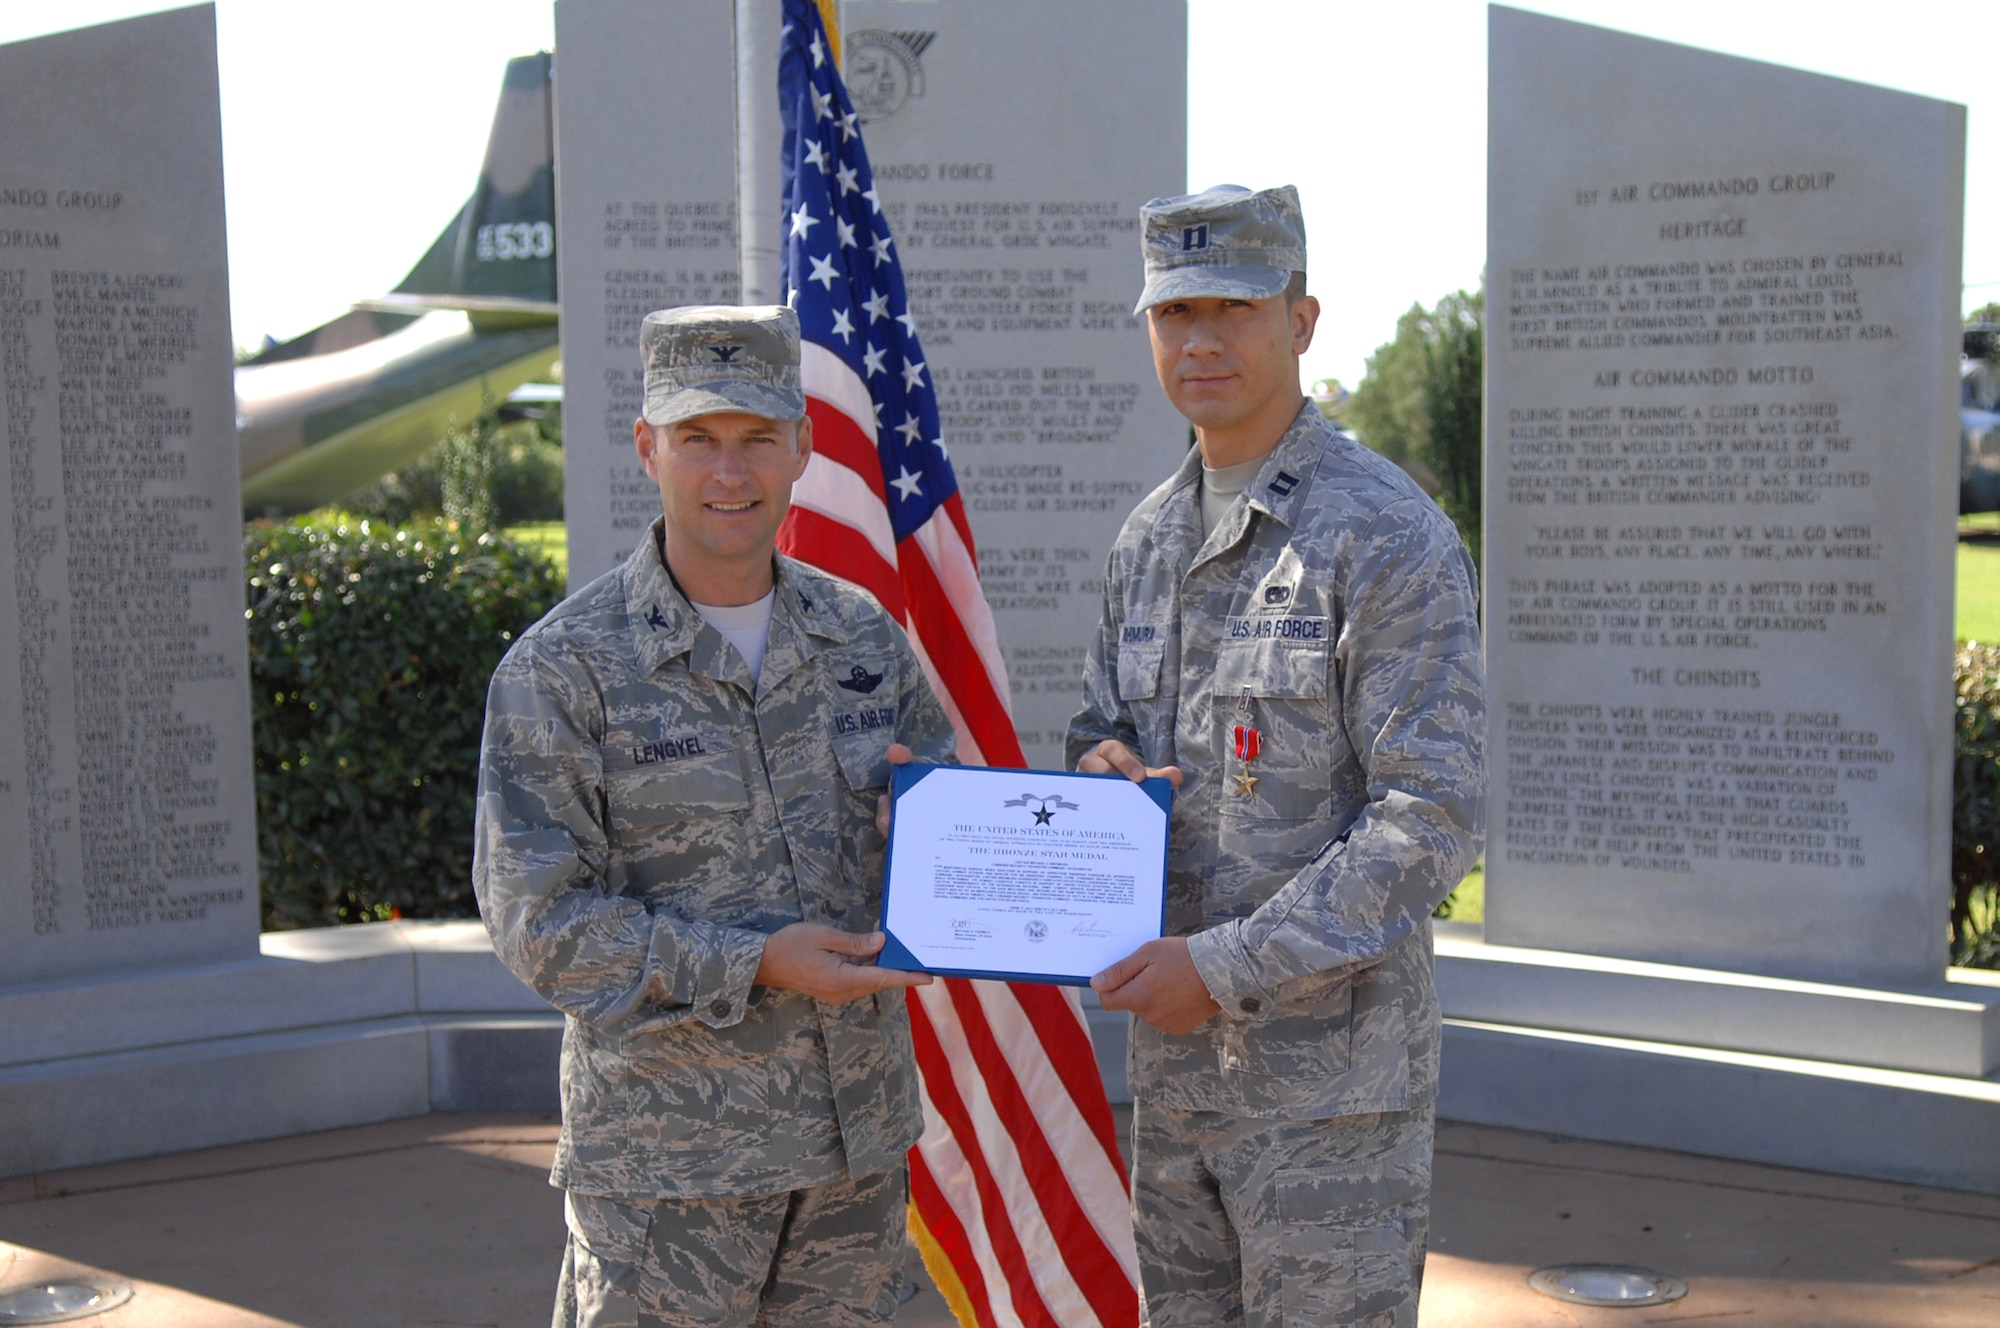 U.S. Air Force Capt. Michael Nishmura of the 1st Special Operations Logistics Readiness Squadron is presented with the certificate accompanying his Bronze Star by Col. Gregory Lengyel, Commander  1st Special Operations Wing, at Hurlburt Field, Sept 30, 2009, Fla. (U.S. Air Force photo by Tech Sgt. Scott MacKay/Released)